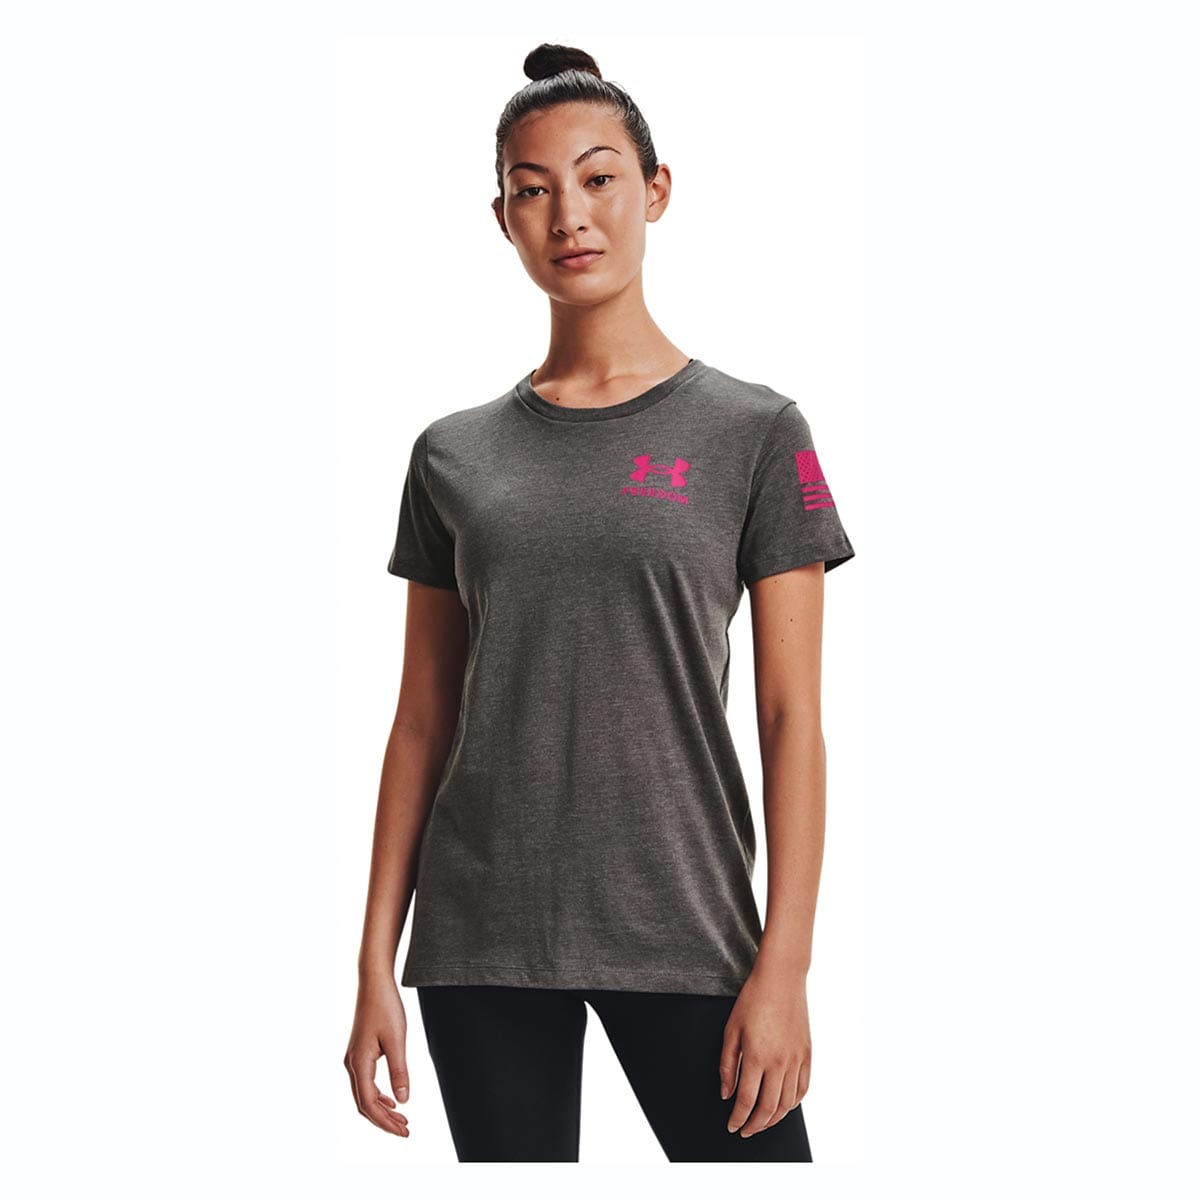 Under Armour Women's Freedom Flag T-Shirt